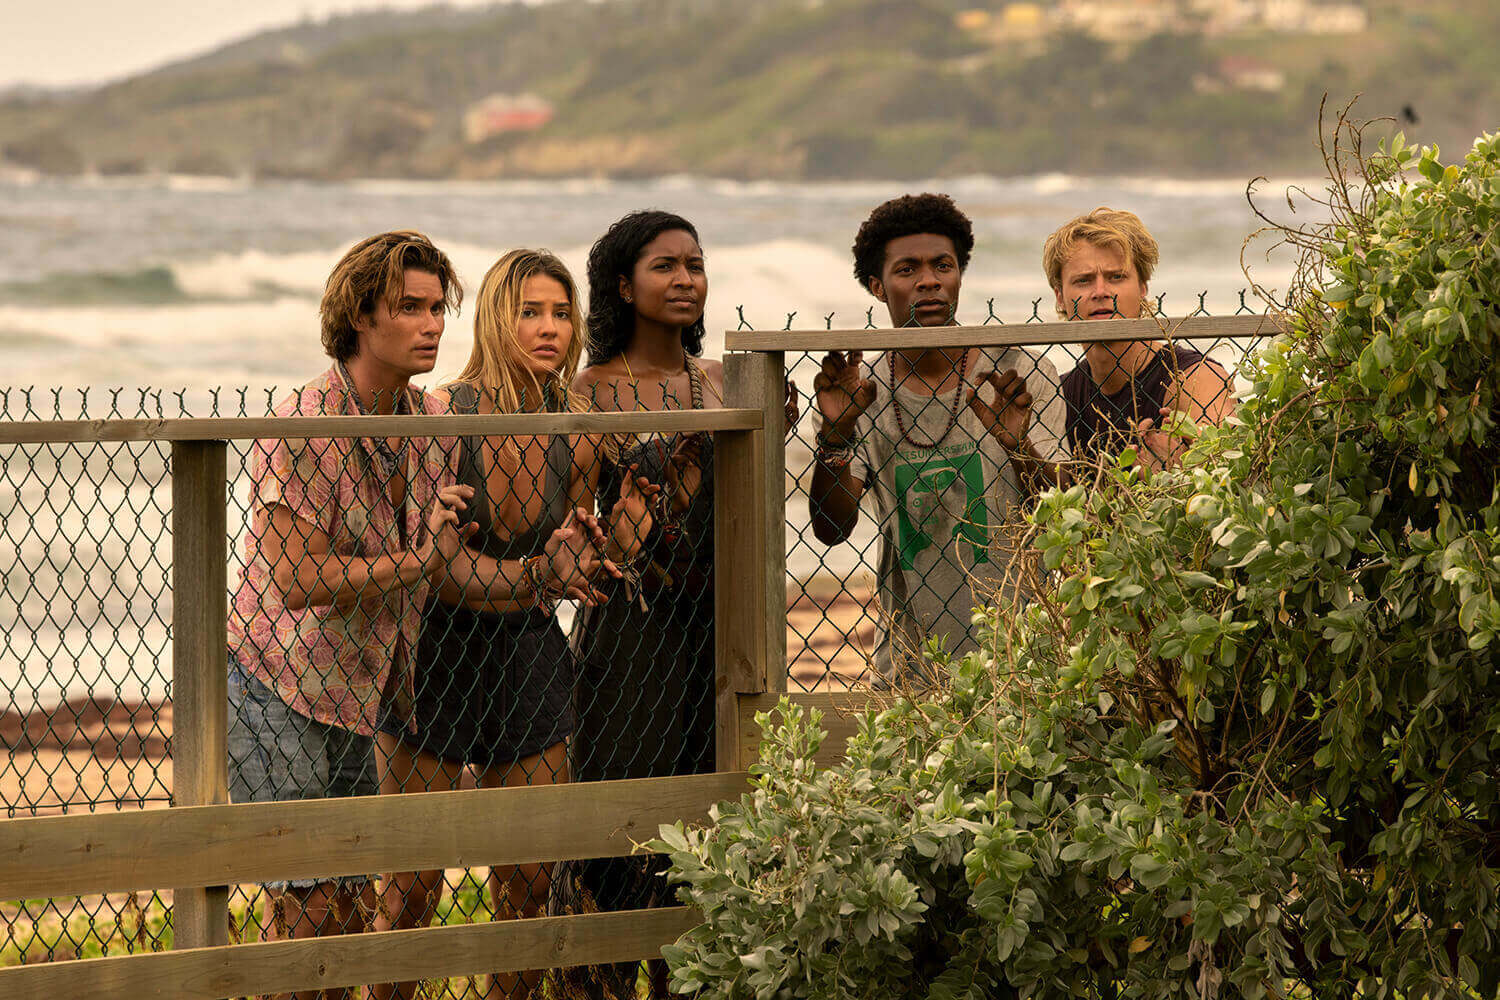 Outer Banks cast members Chase Stokes as John B, Madelyn Cline as Sarah, Carlacia Grant as Cleo, Jonathan Daviss as Pope, and Rudy Pankow as JJ in looking over a wooden fence